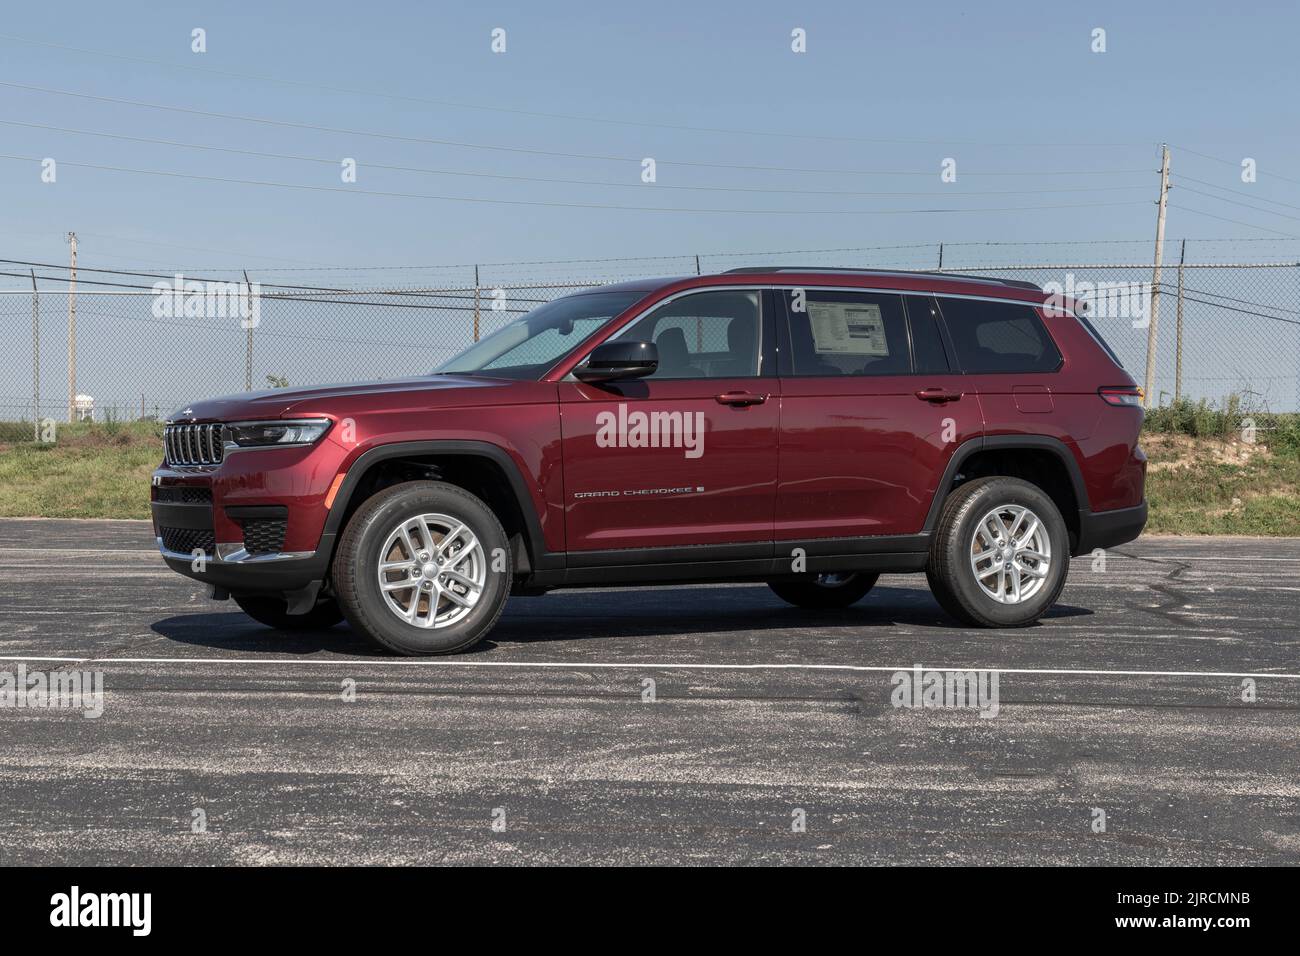 Bunker Hill - Circa August 2022: Jeep Grand Cherokee display at a Stellantis dealership. Jeep offers the Grand Cherokee in Laredo, Trailhawk and Overl Stock Photo